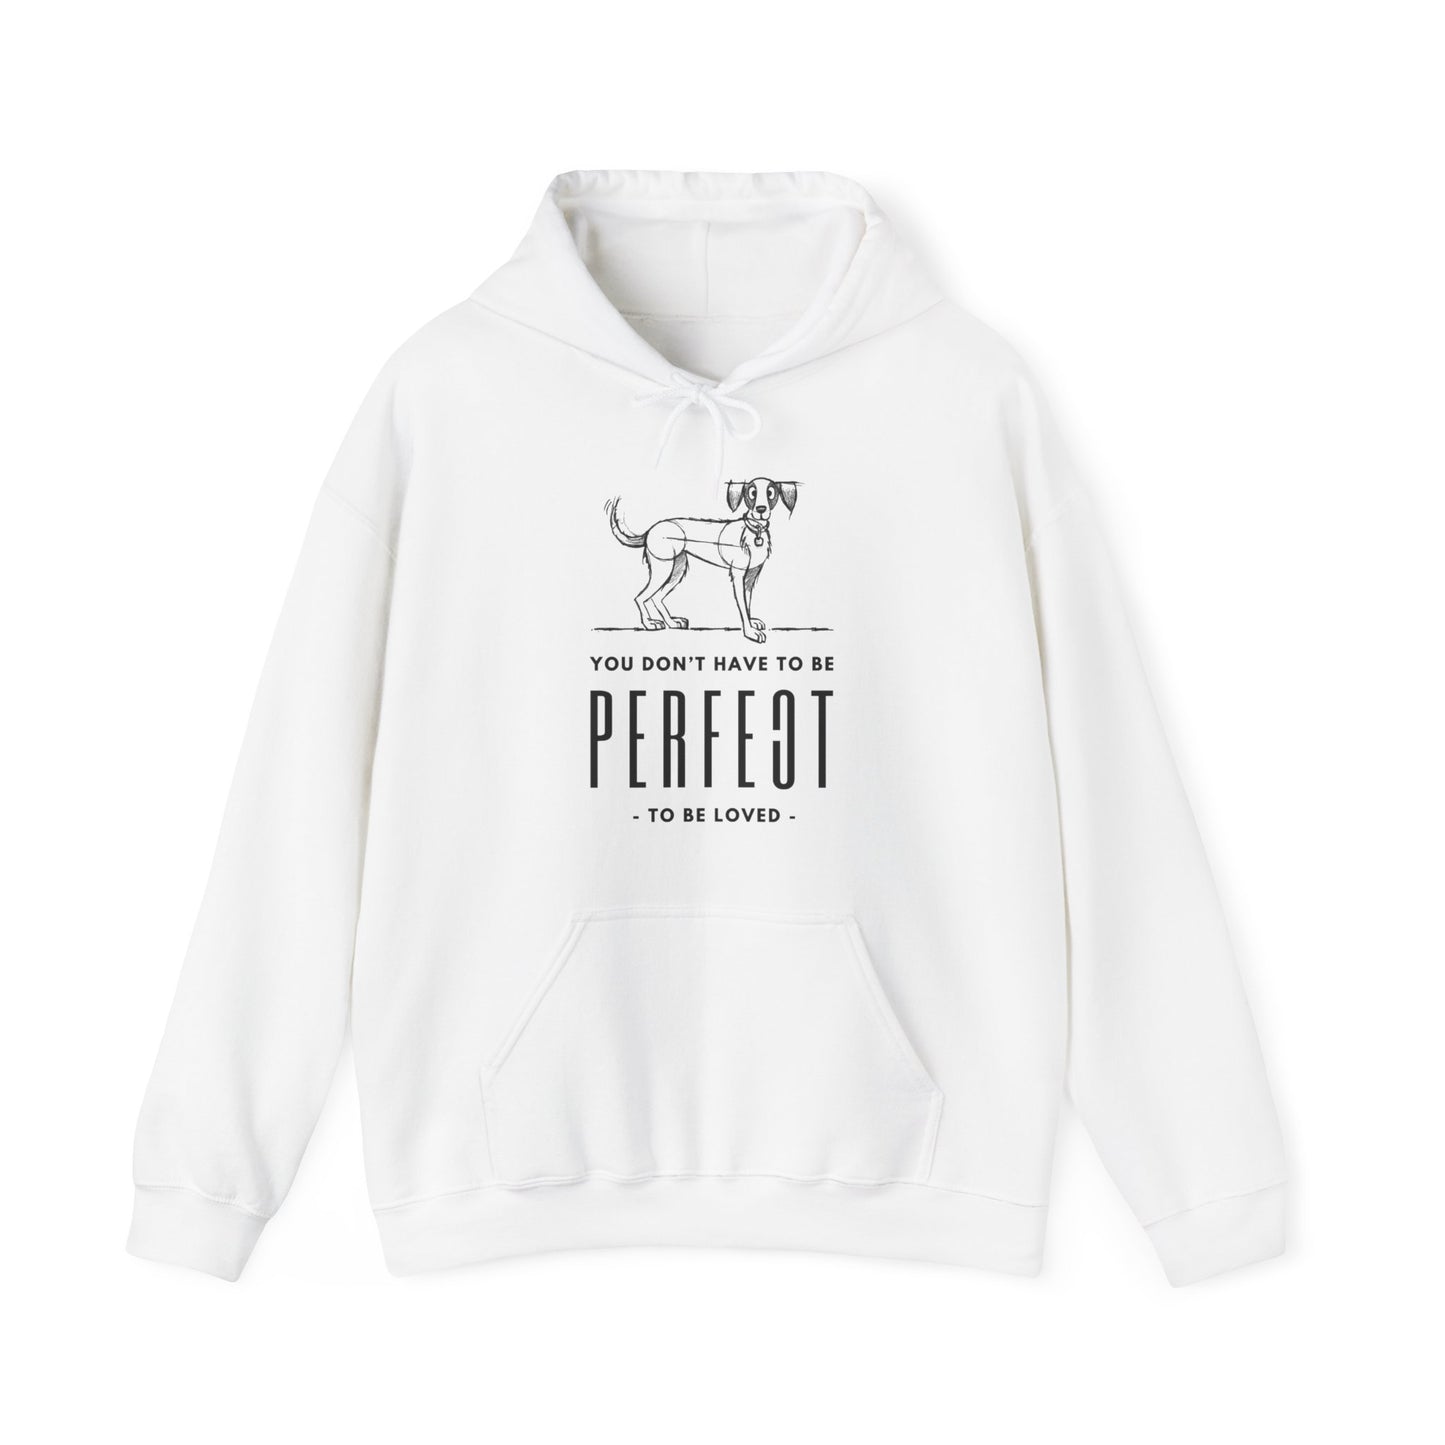 Dogs Pure Love presents a white unisex hoodie featuring a sketch of a dog and the phrase 'You don't have to be perfect to be loved' printed in black, set against a white background.